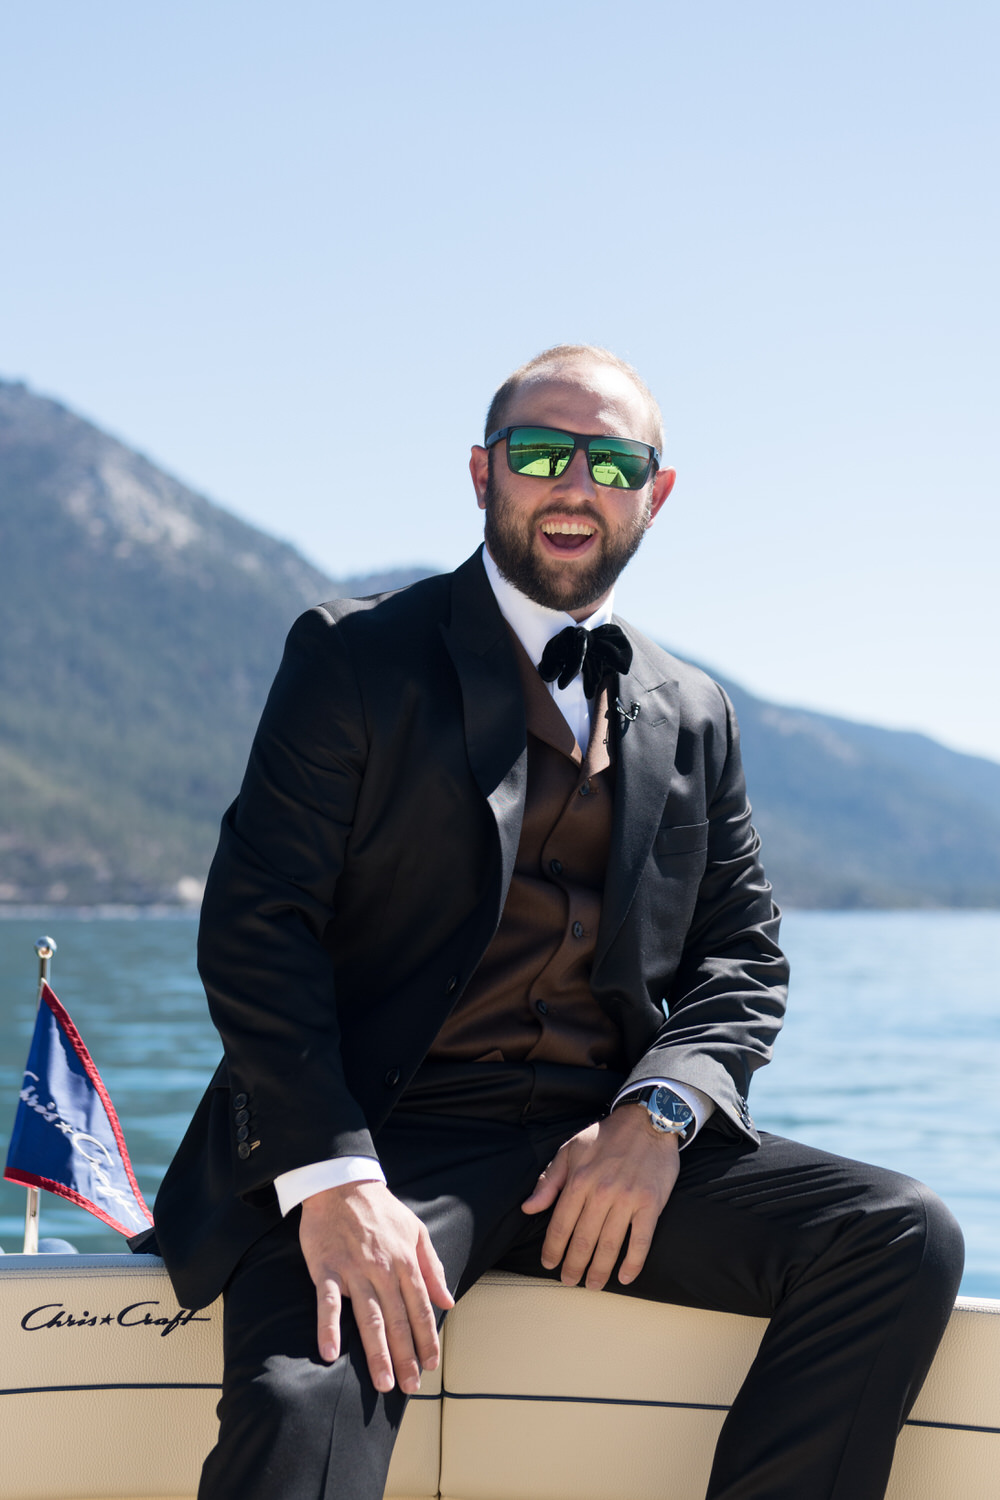 Candid photo of a groom sitting on the front of a motorboat on Lake Tahoe.